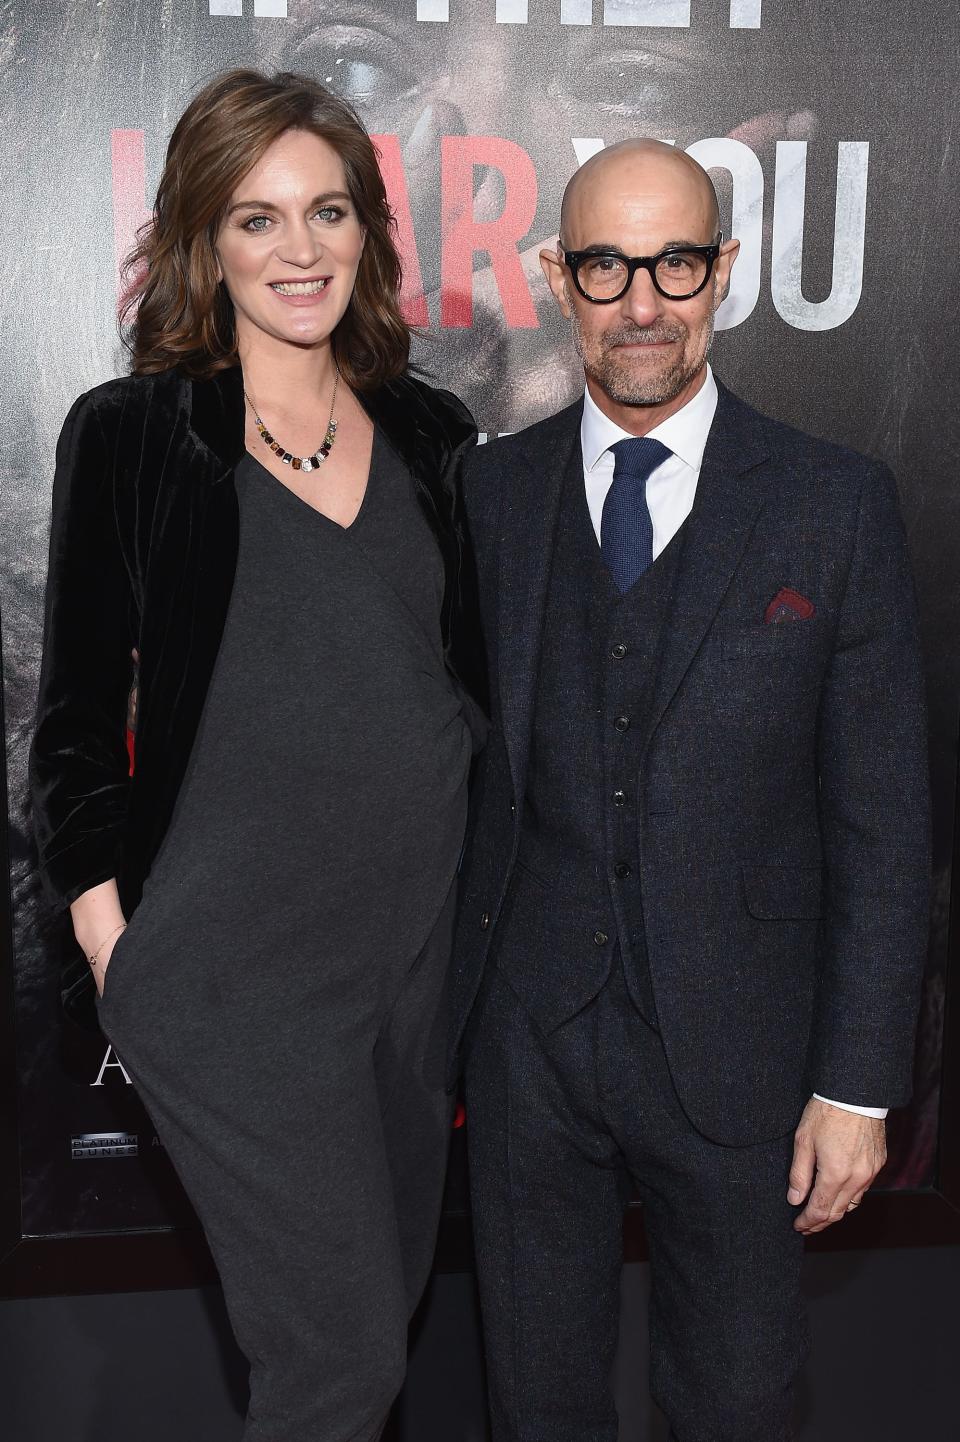 Emily Blunt's sister, Felicity Blunt, and her husband Stanley Tucci were on-hand to support "A Quiet Place," which John Krasinski co-wrote.